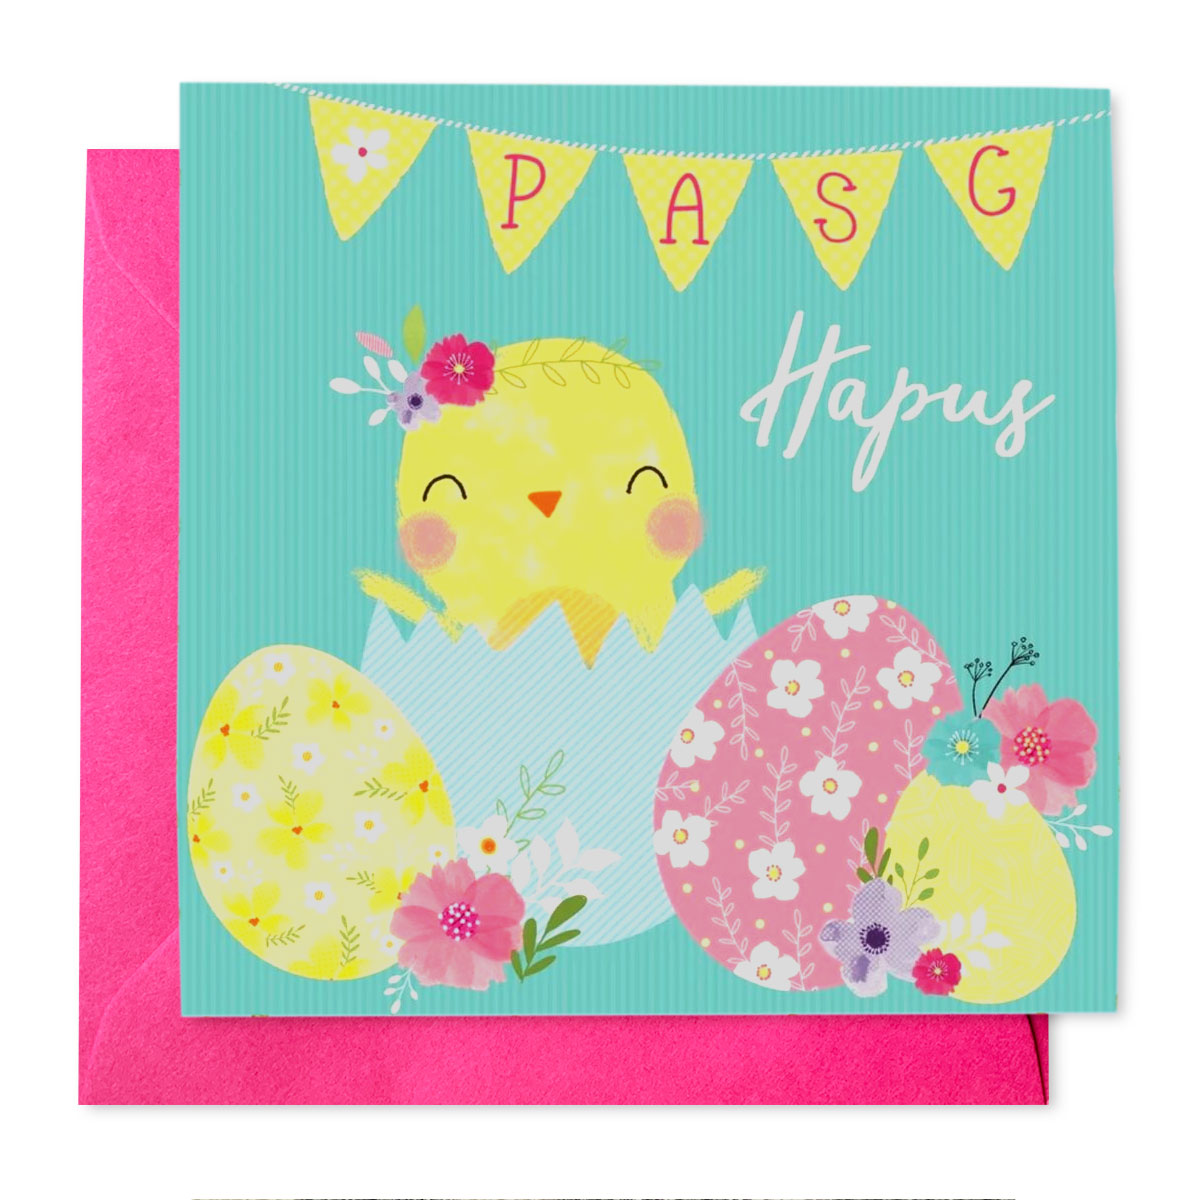 Pasg Hapus Chick Card